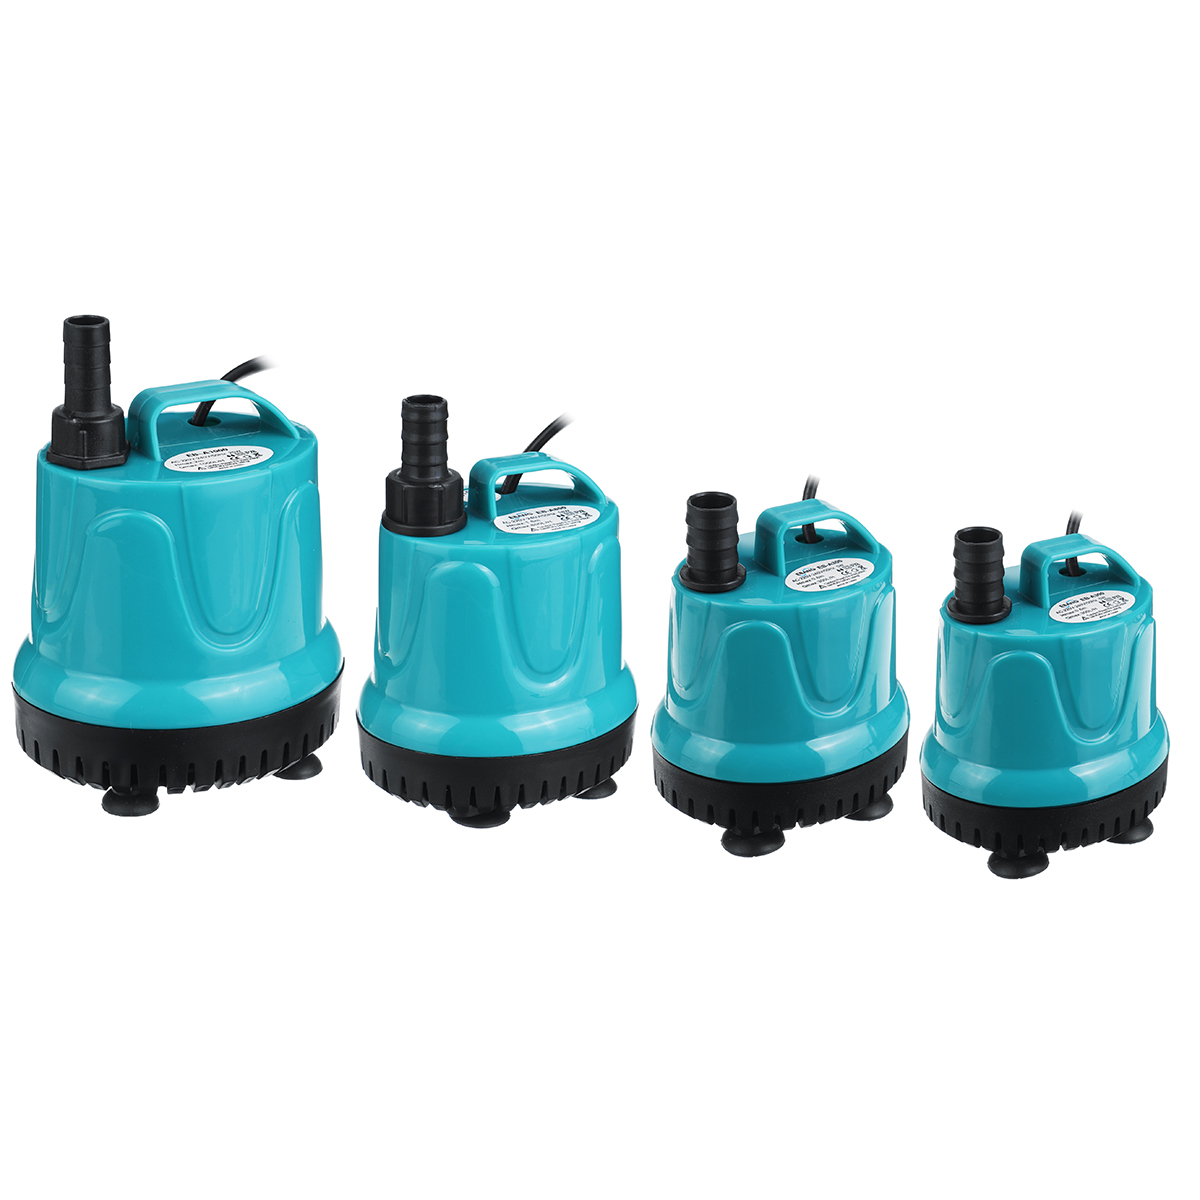 581825W-Ultra-quiet-Mini-Brushless-Water-Pump-Filter-Waterproof-Submersible-Water-Fountain-Pump-For--1646198-7